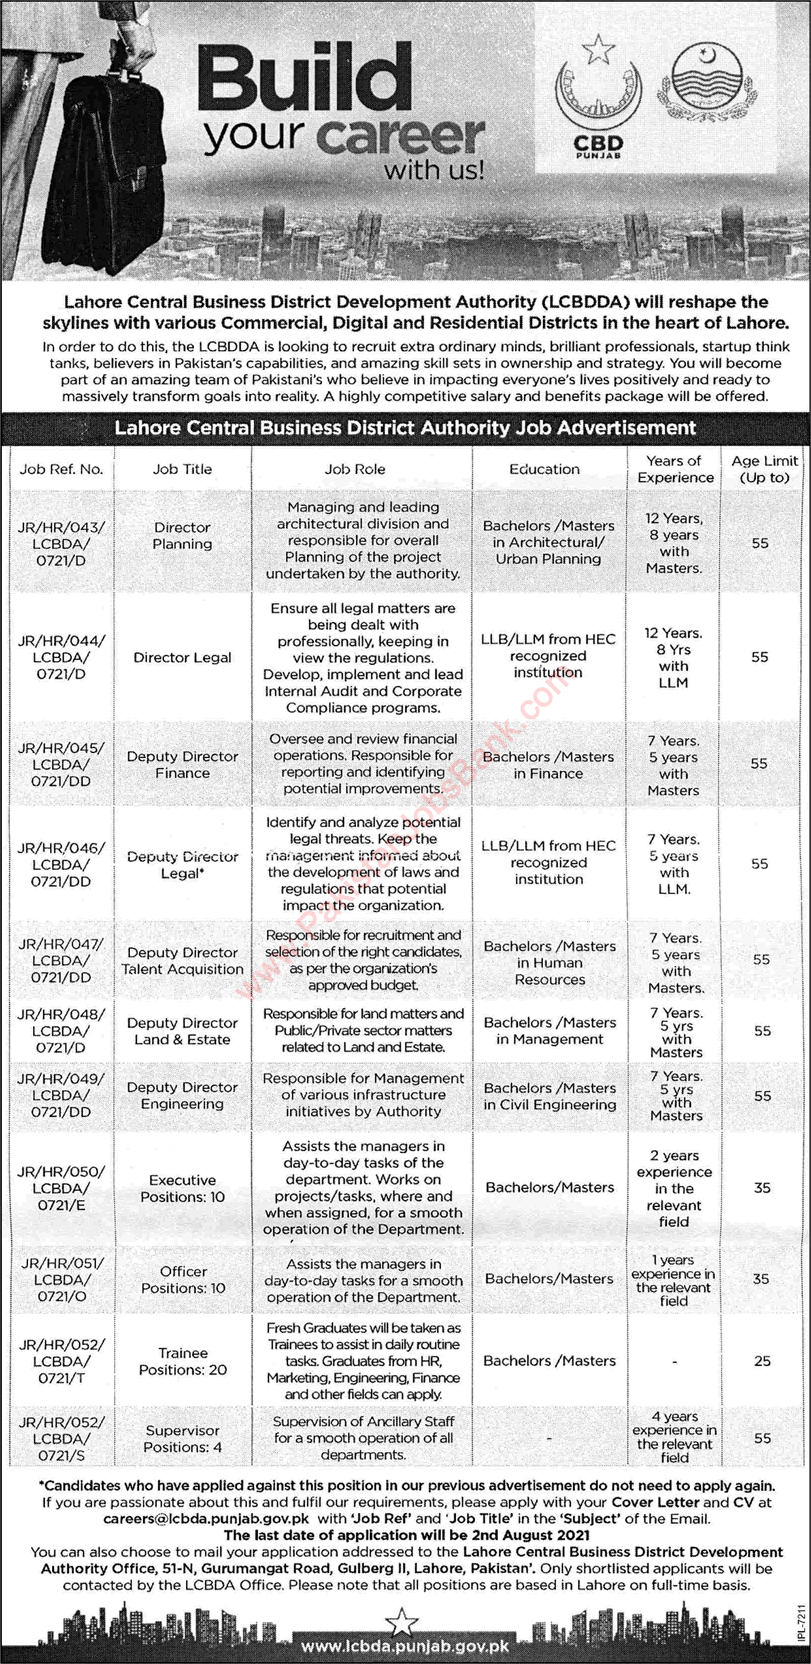 Lahore Central Business District Development Authority Jobs 2021 July / August LCBDDA Latest